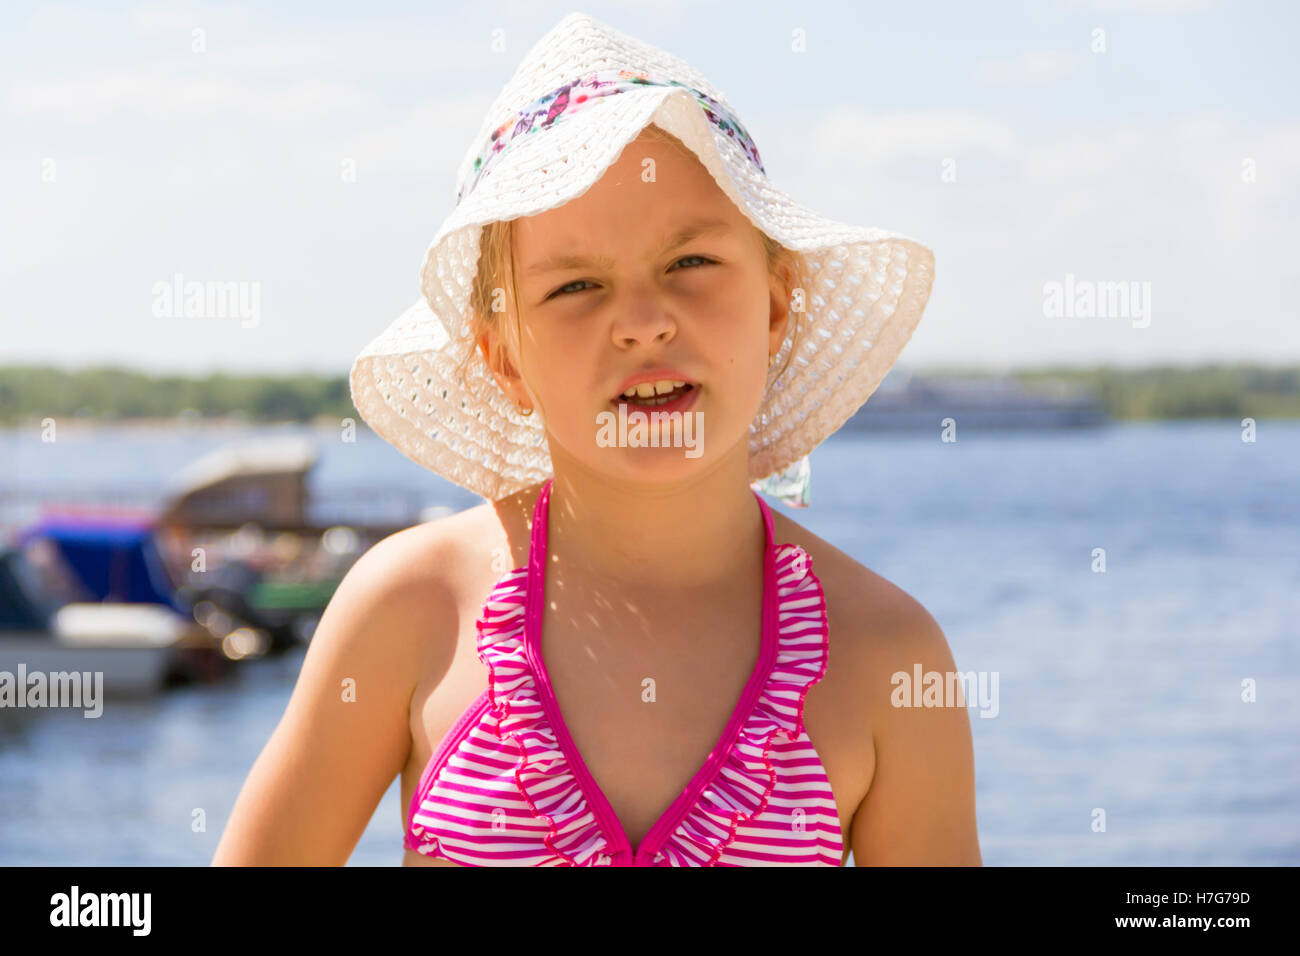 Cute girl in pink swimsuit and white hat Stock Photo